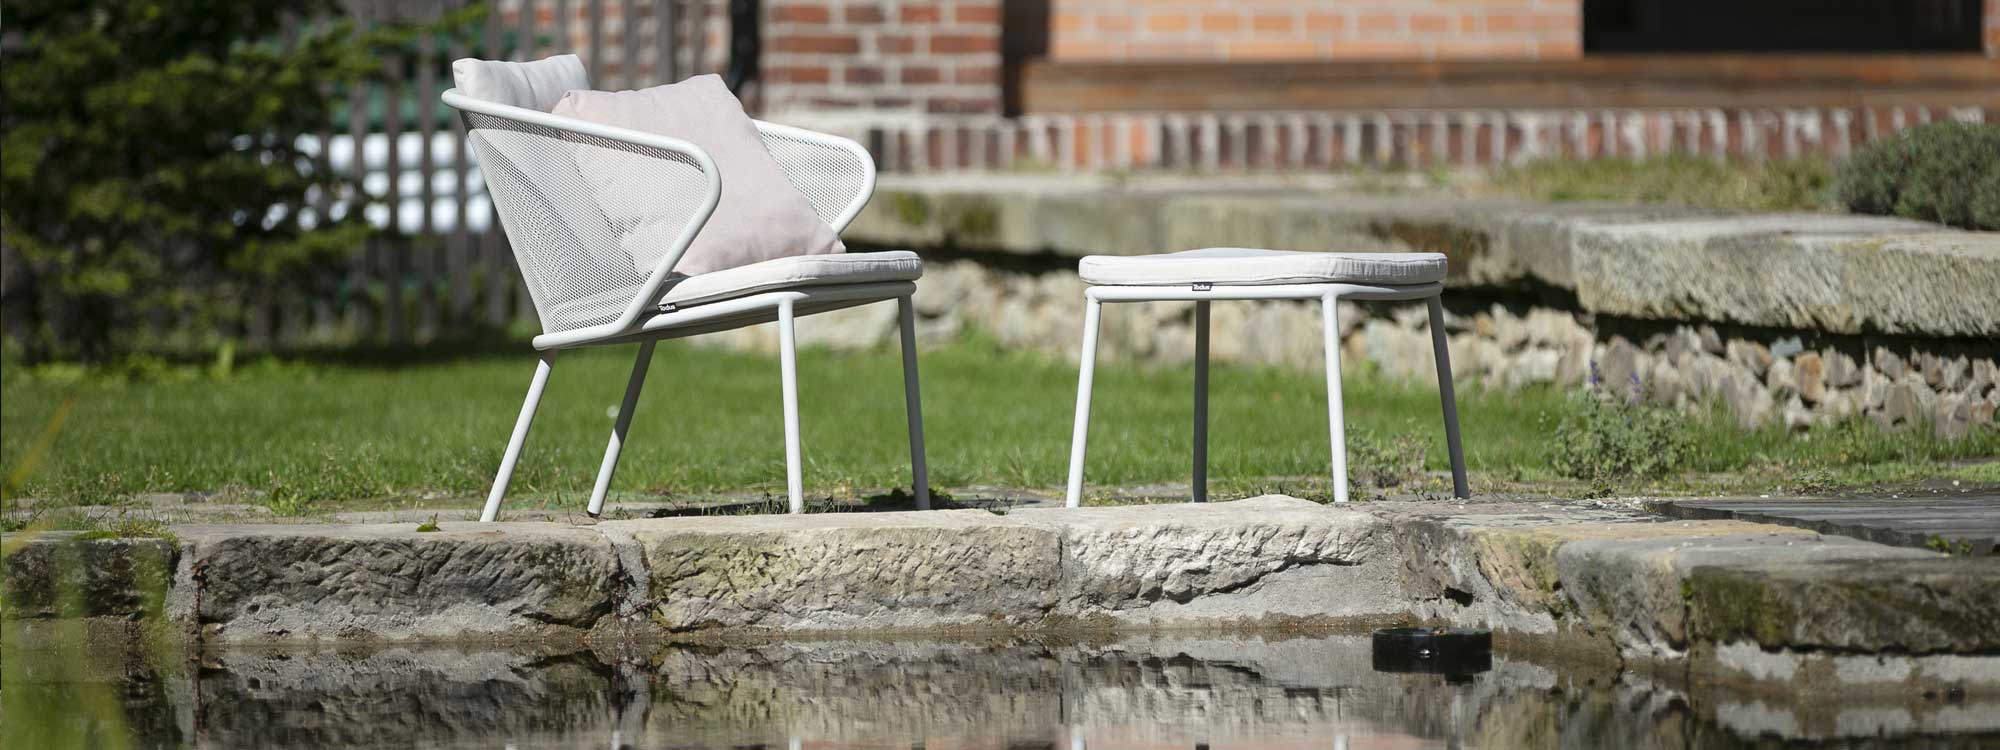 Image of White Condor garden relax chair & foot stool next to water